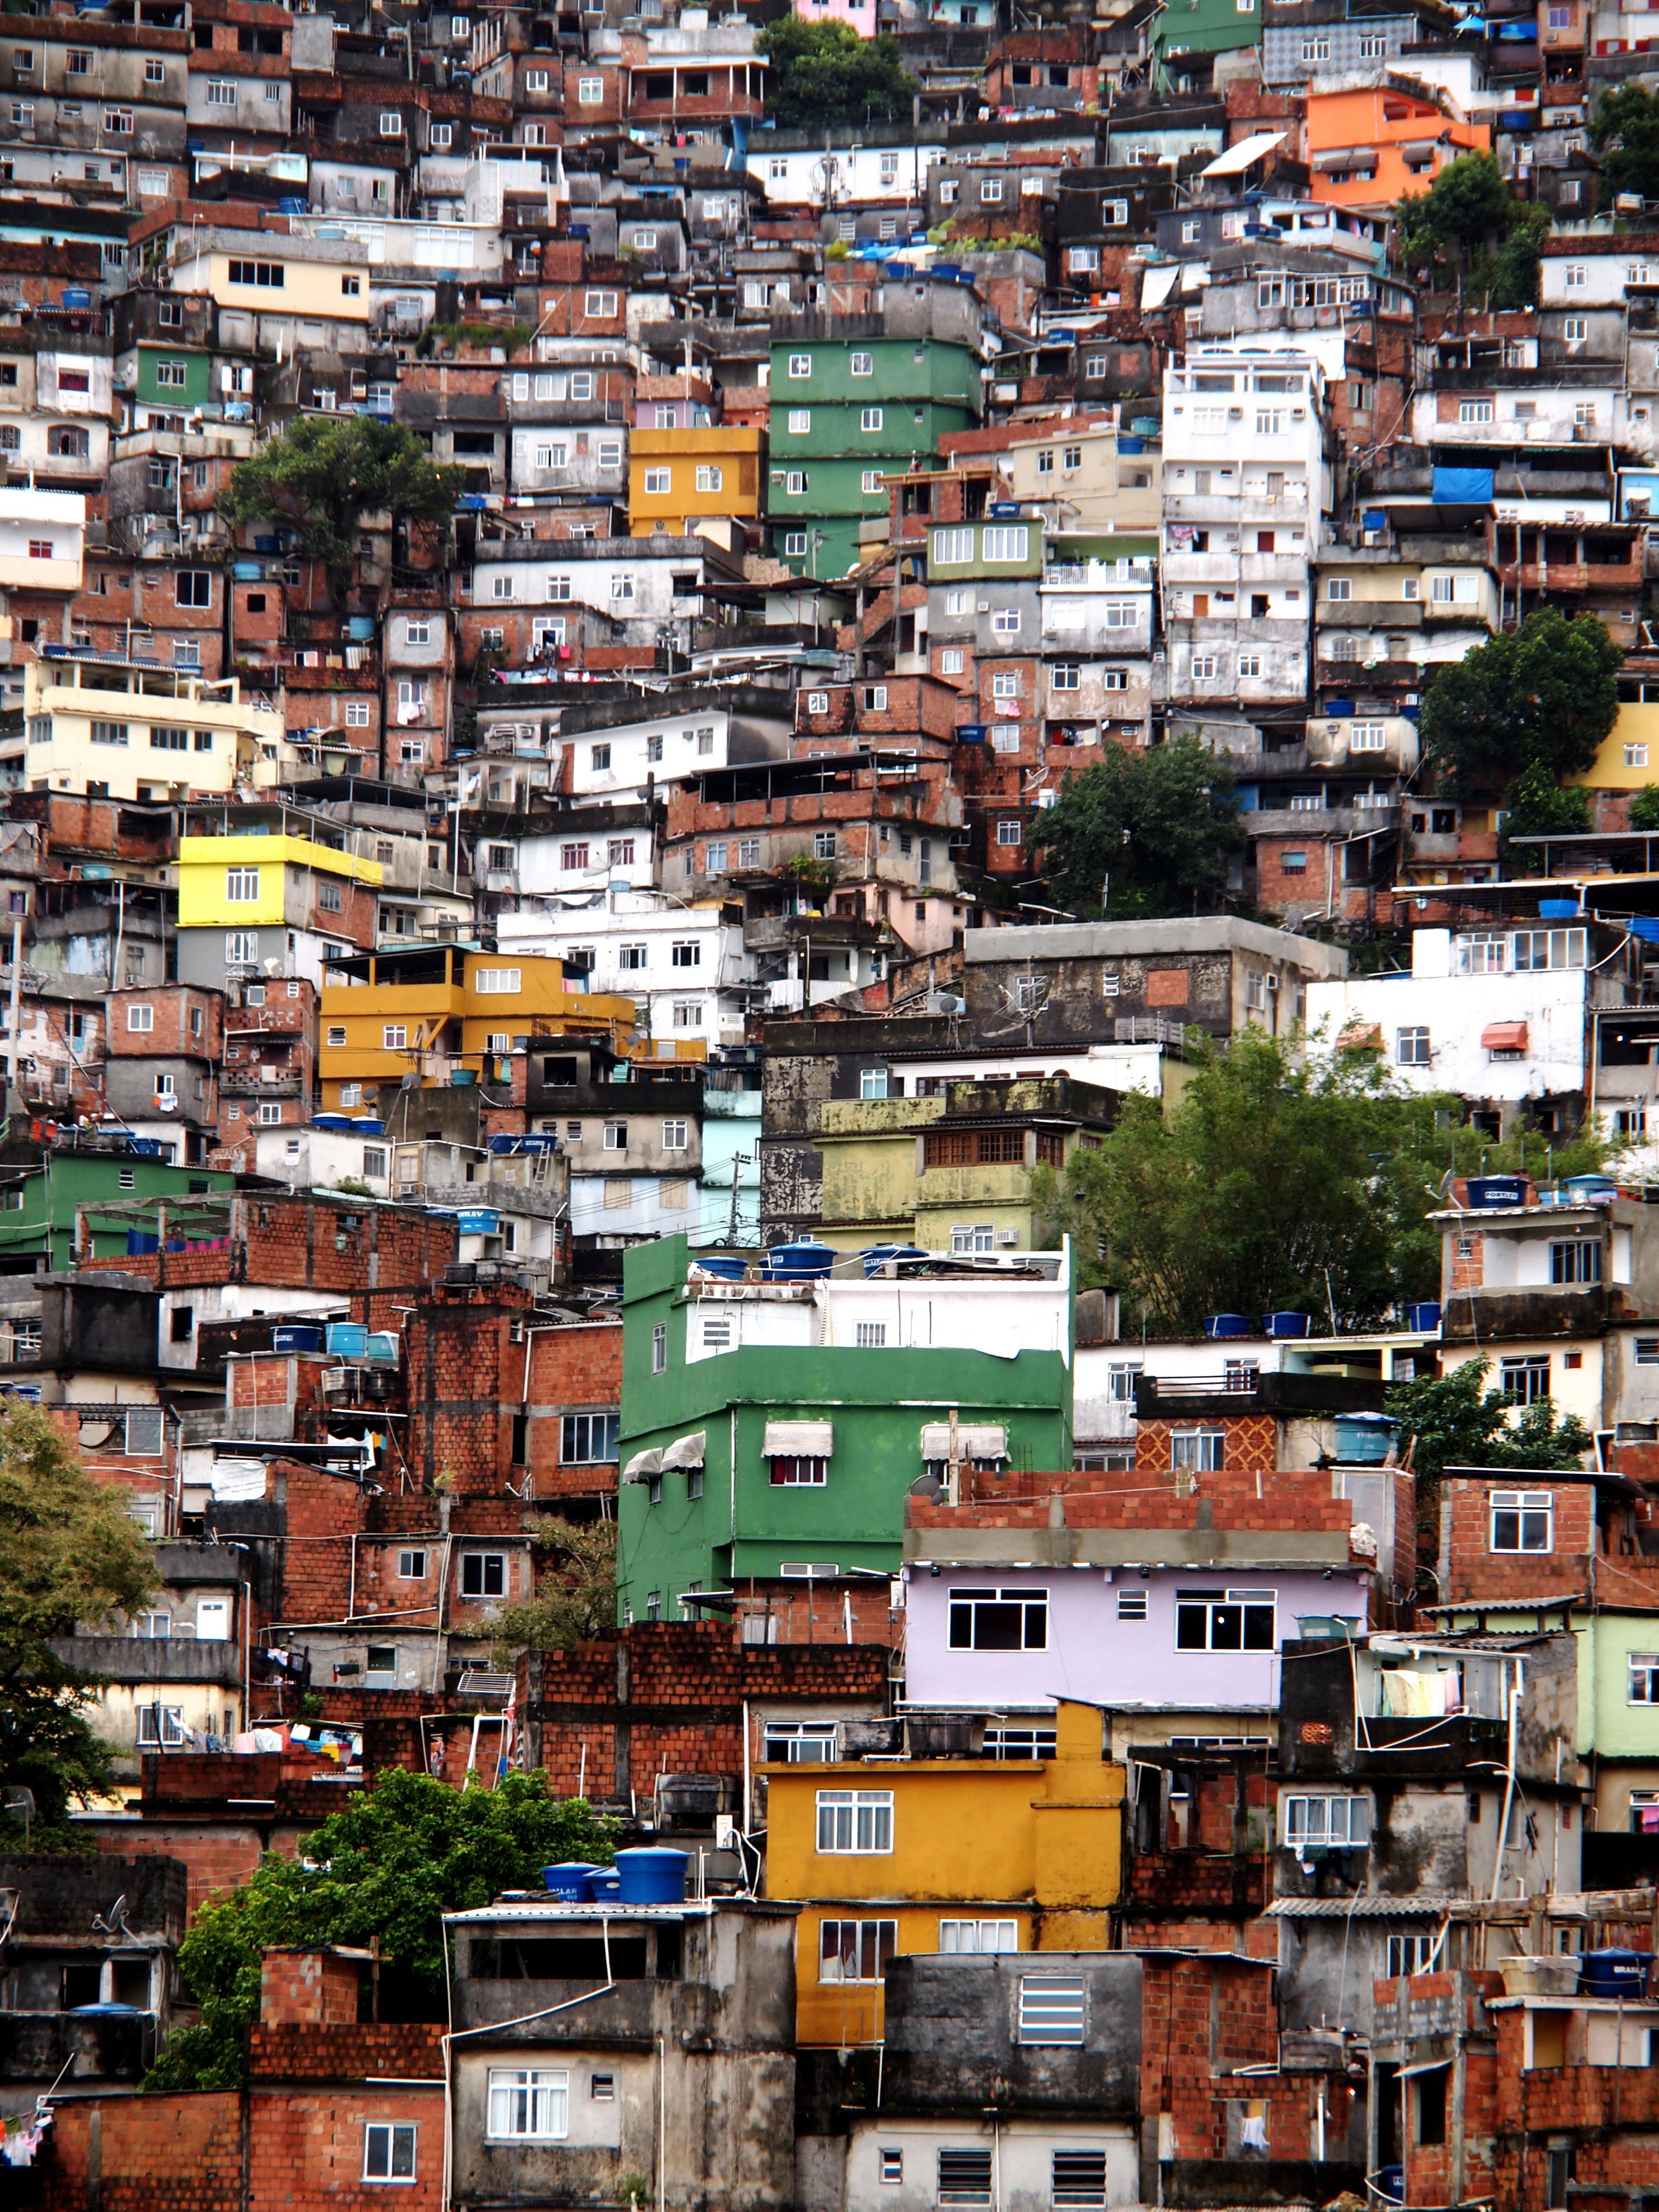 An informal settlement located on a hillside, with many homes squashed together with what looks like no space between them at all